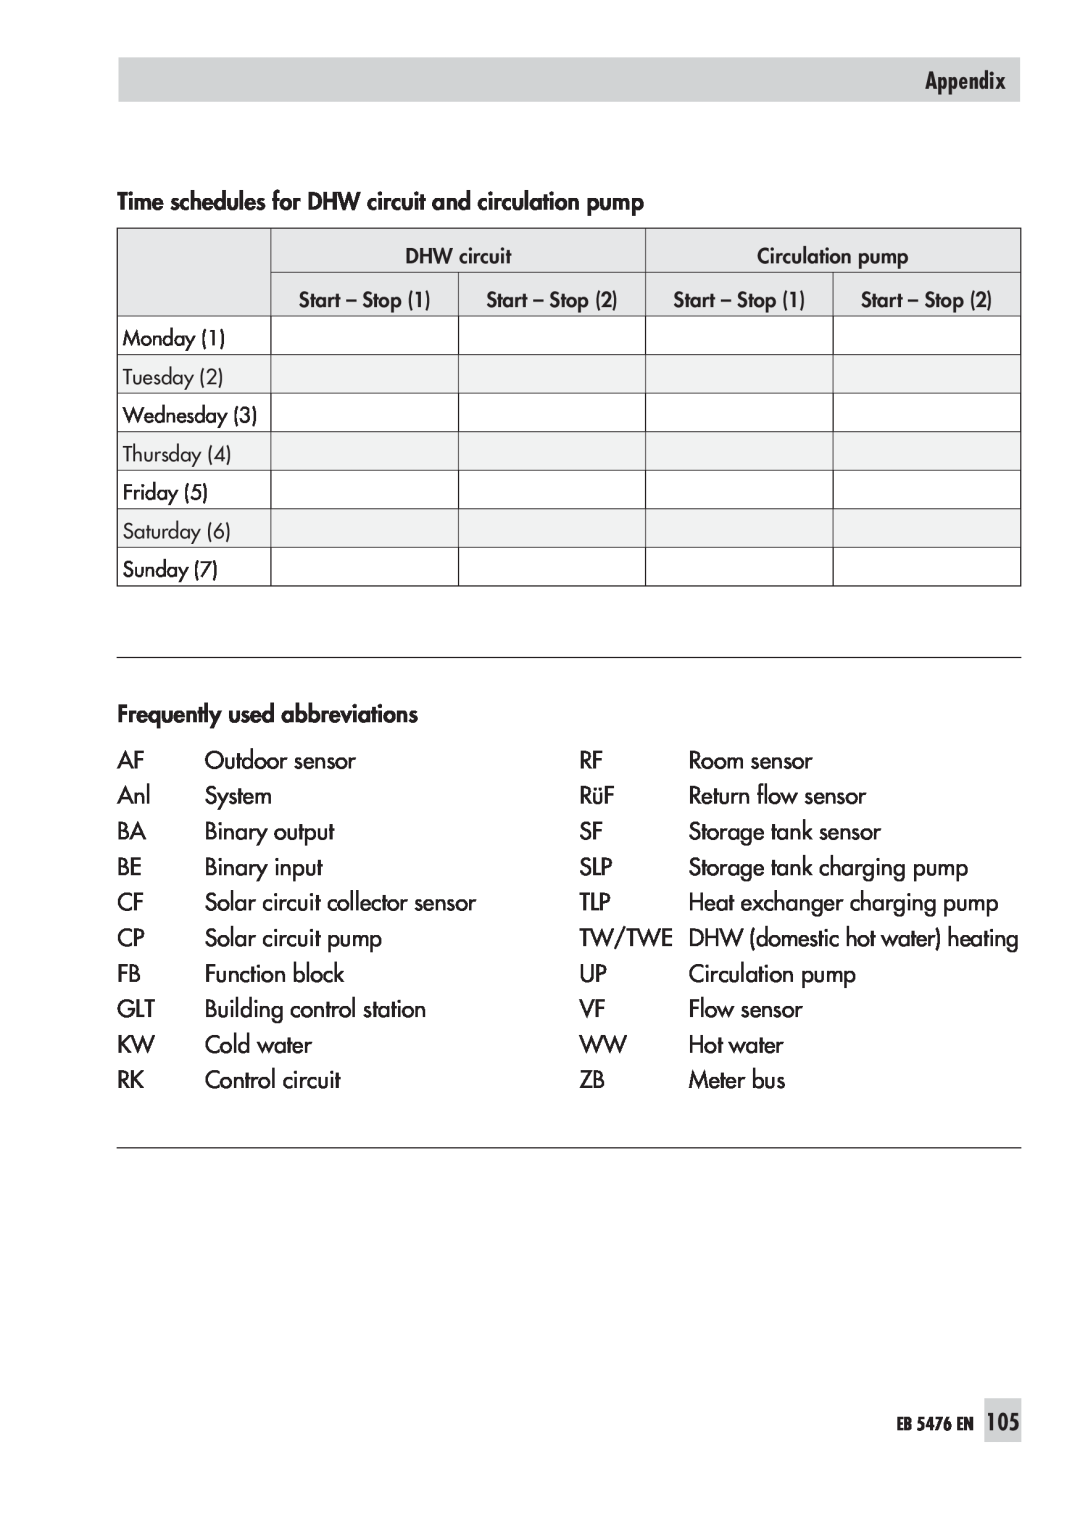 Samson 5476 manual Appendix, Frequently used abbreviations 